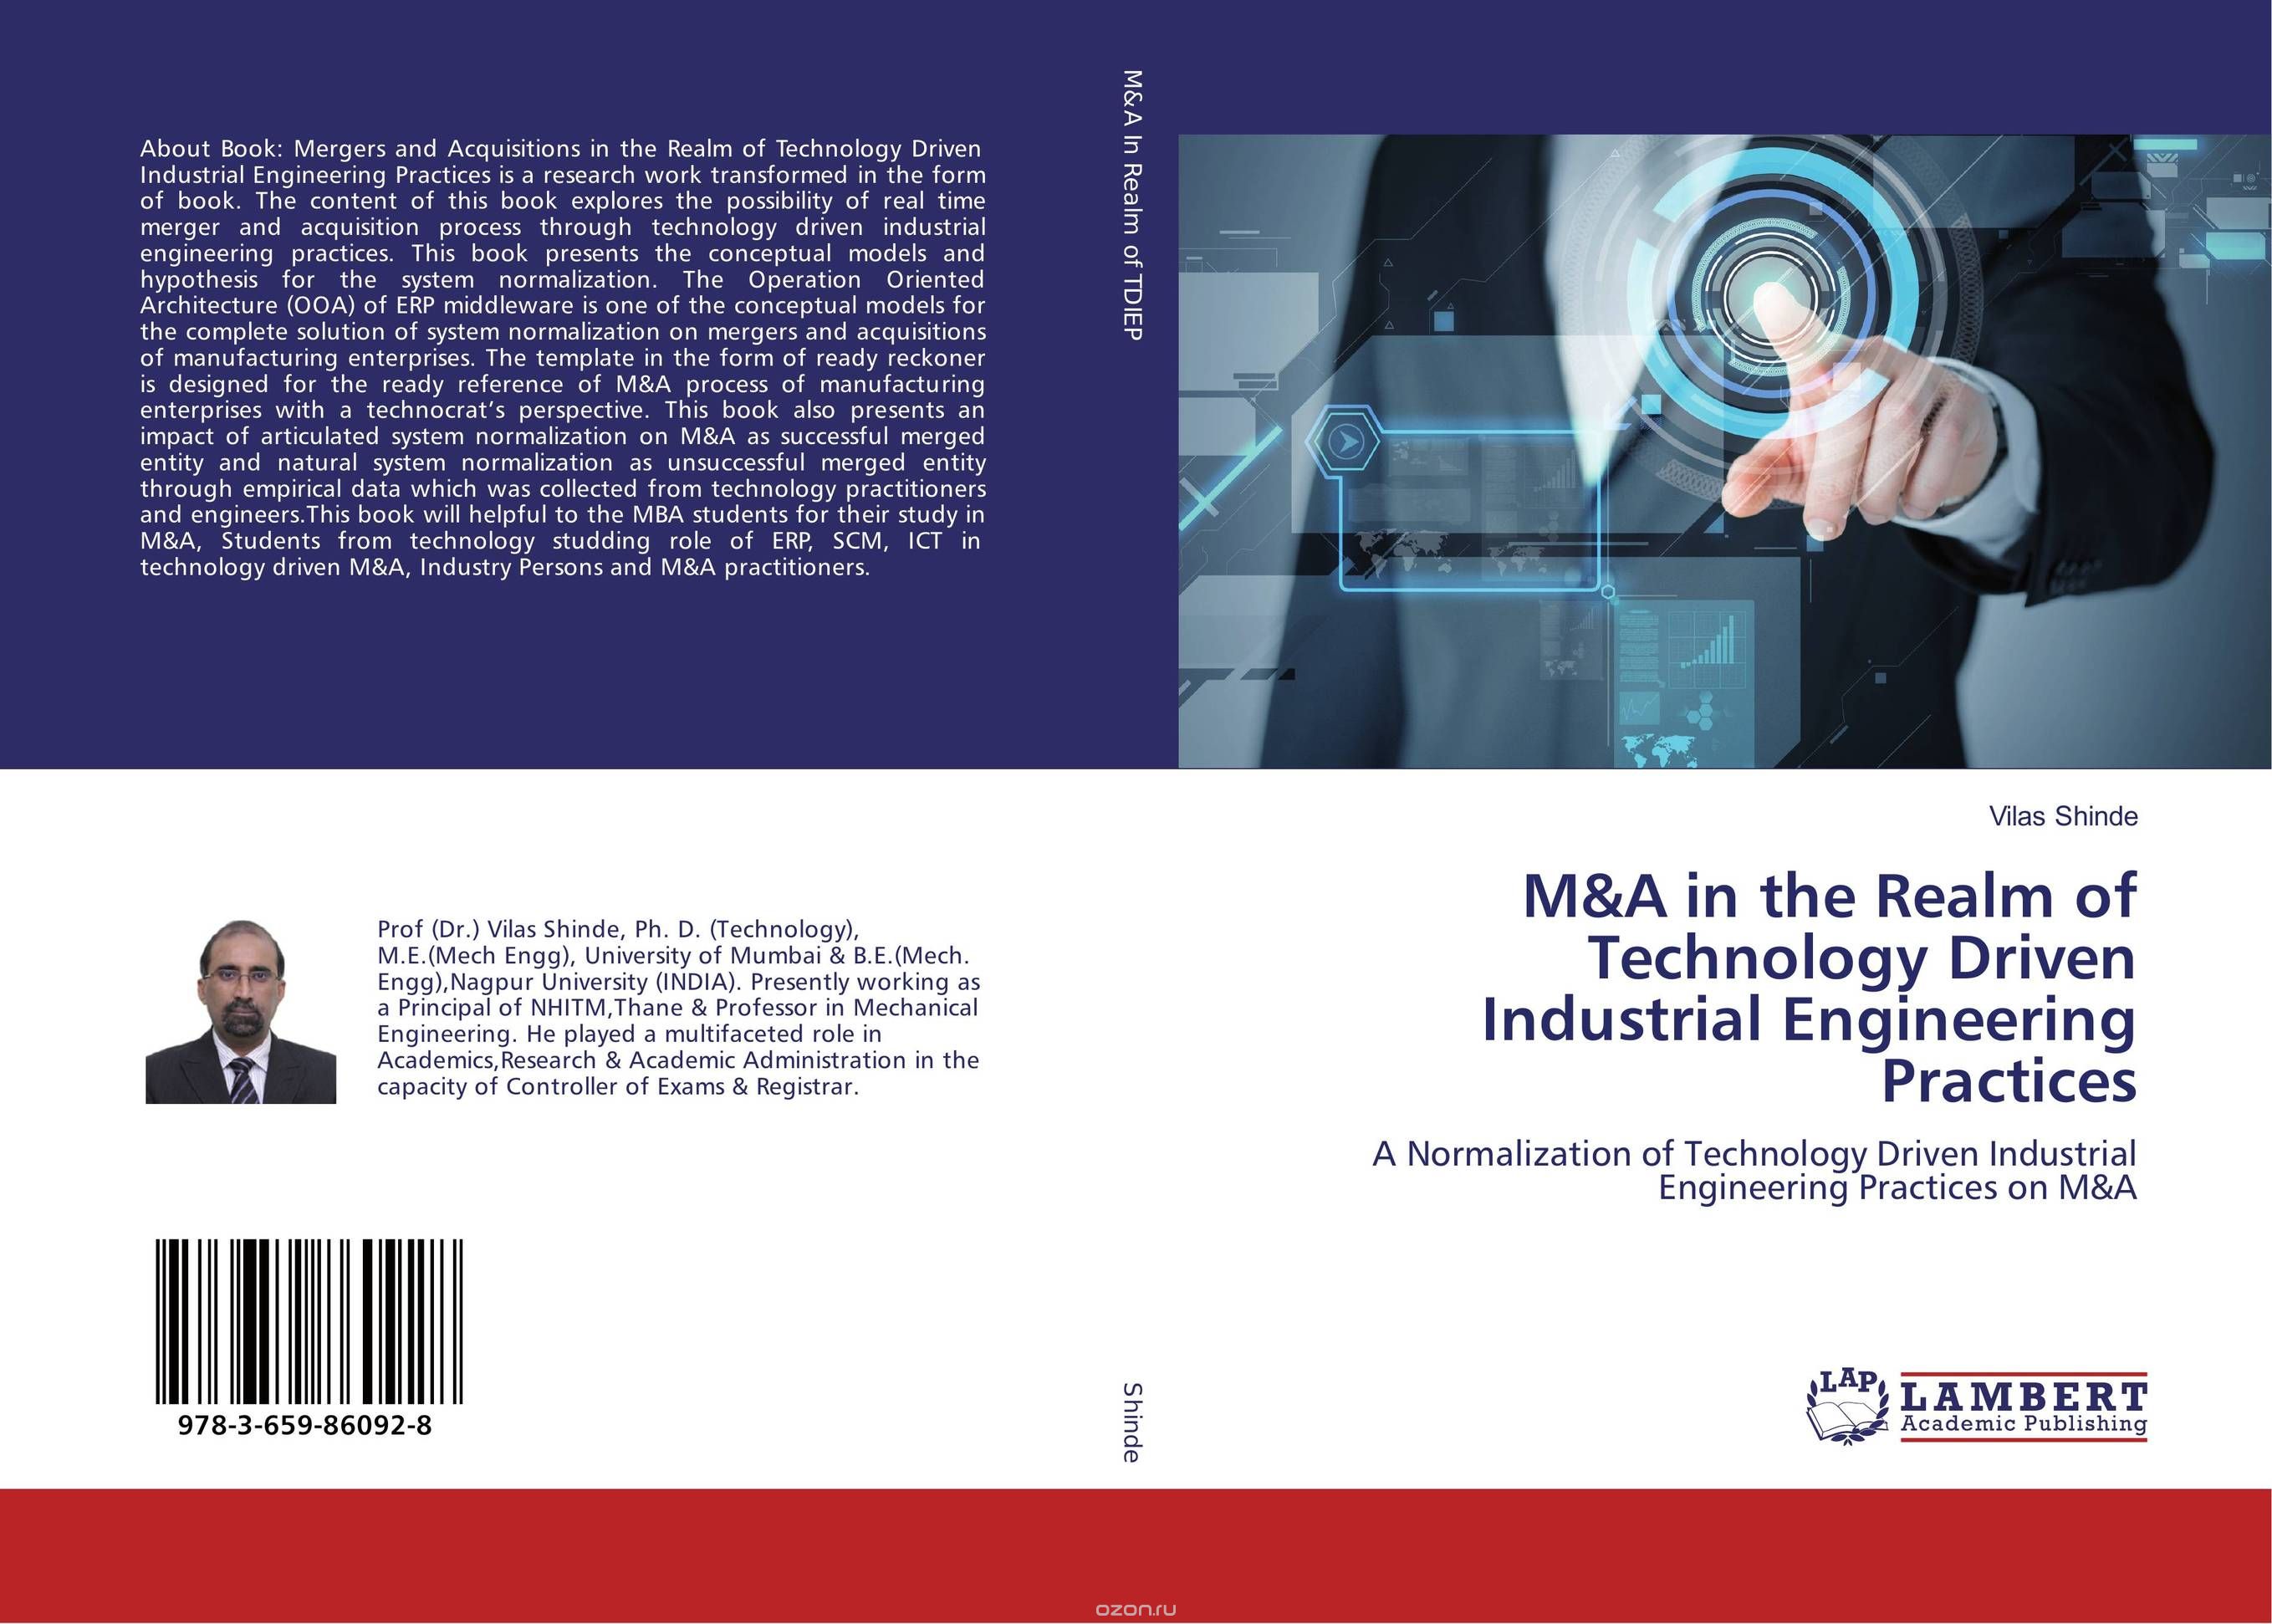 M&A in the Realm of Technology Driven Industrial Engineering Practices